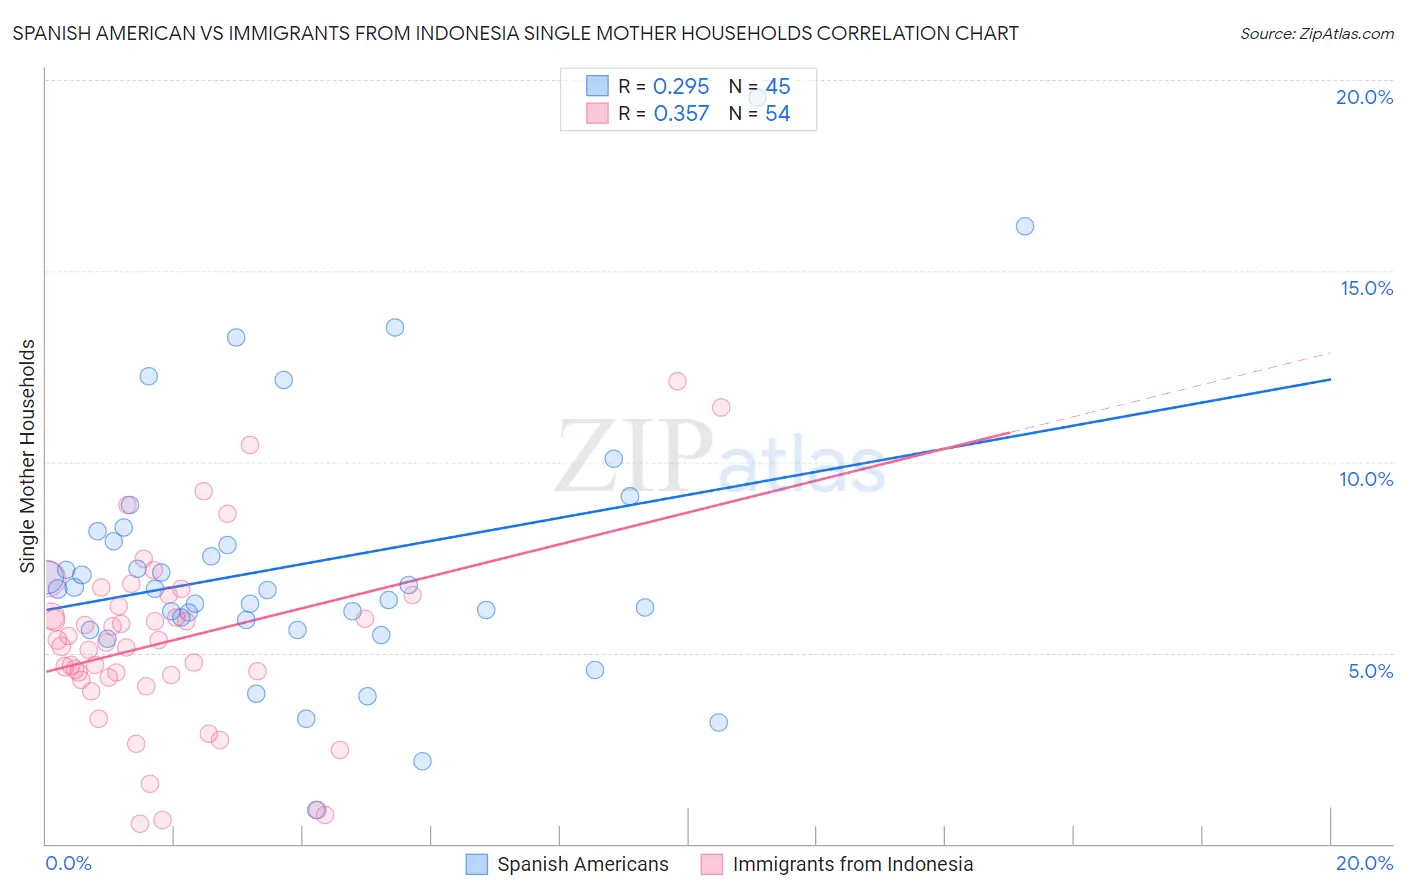 Spanish American vs Immigrants from Indonesia Single Mother Households